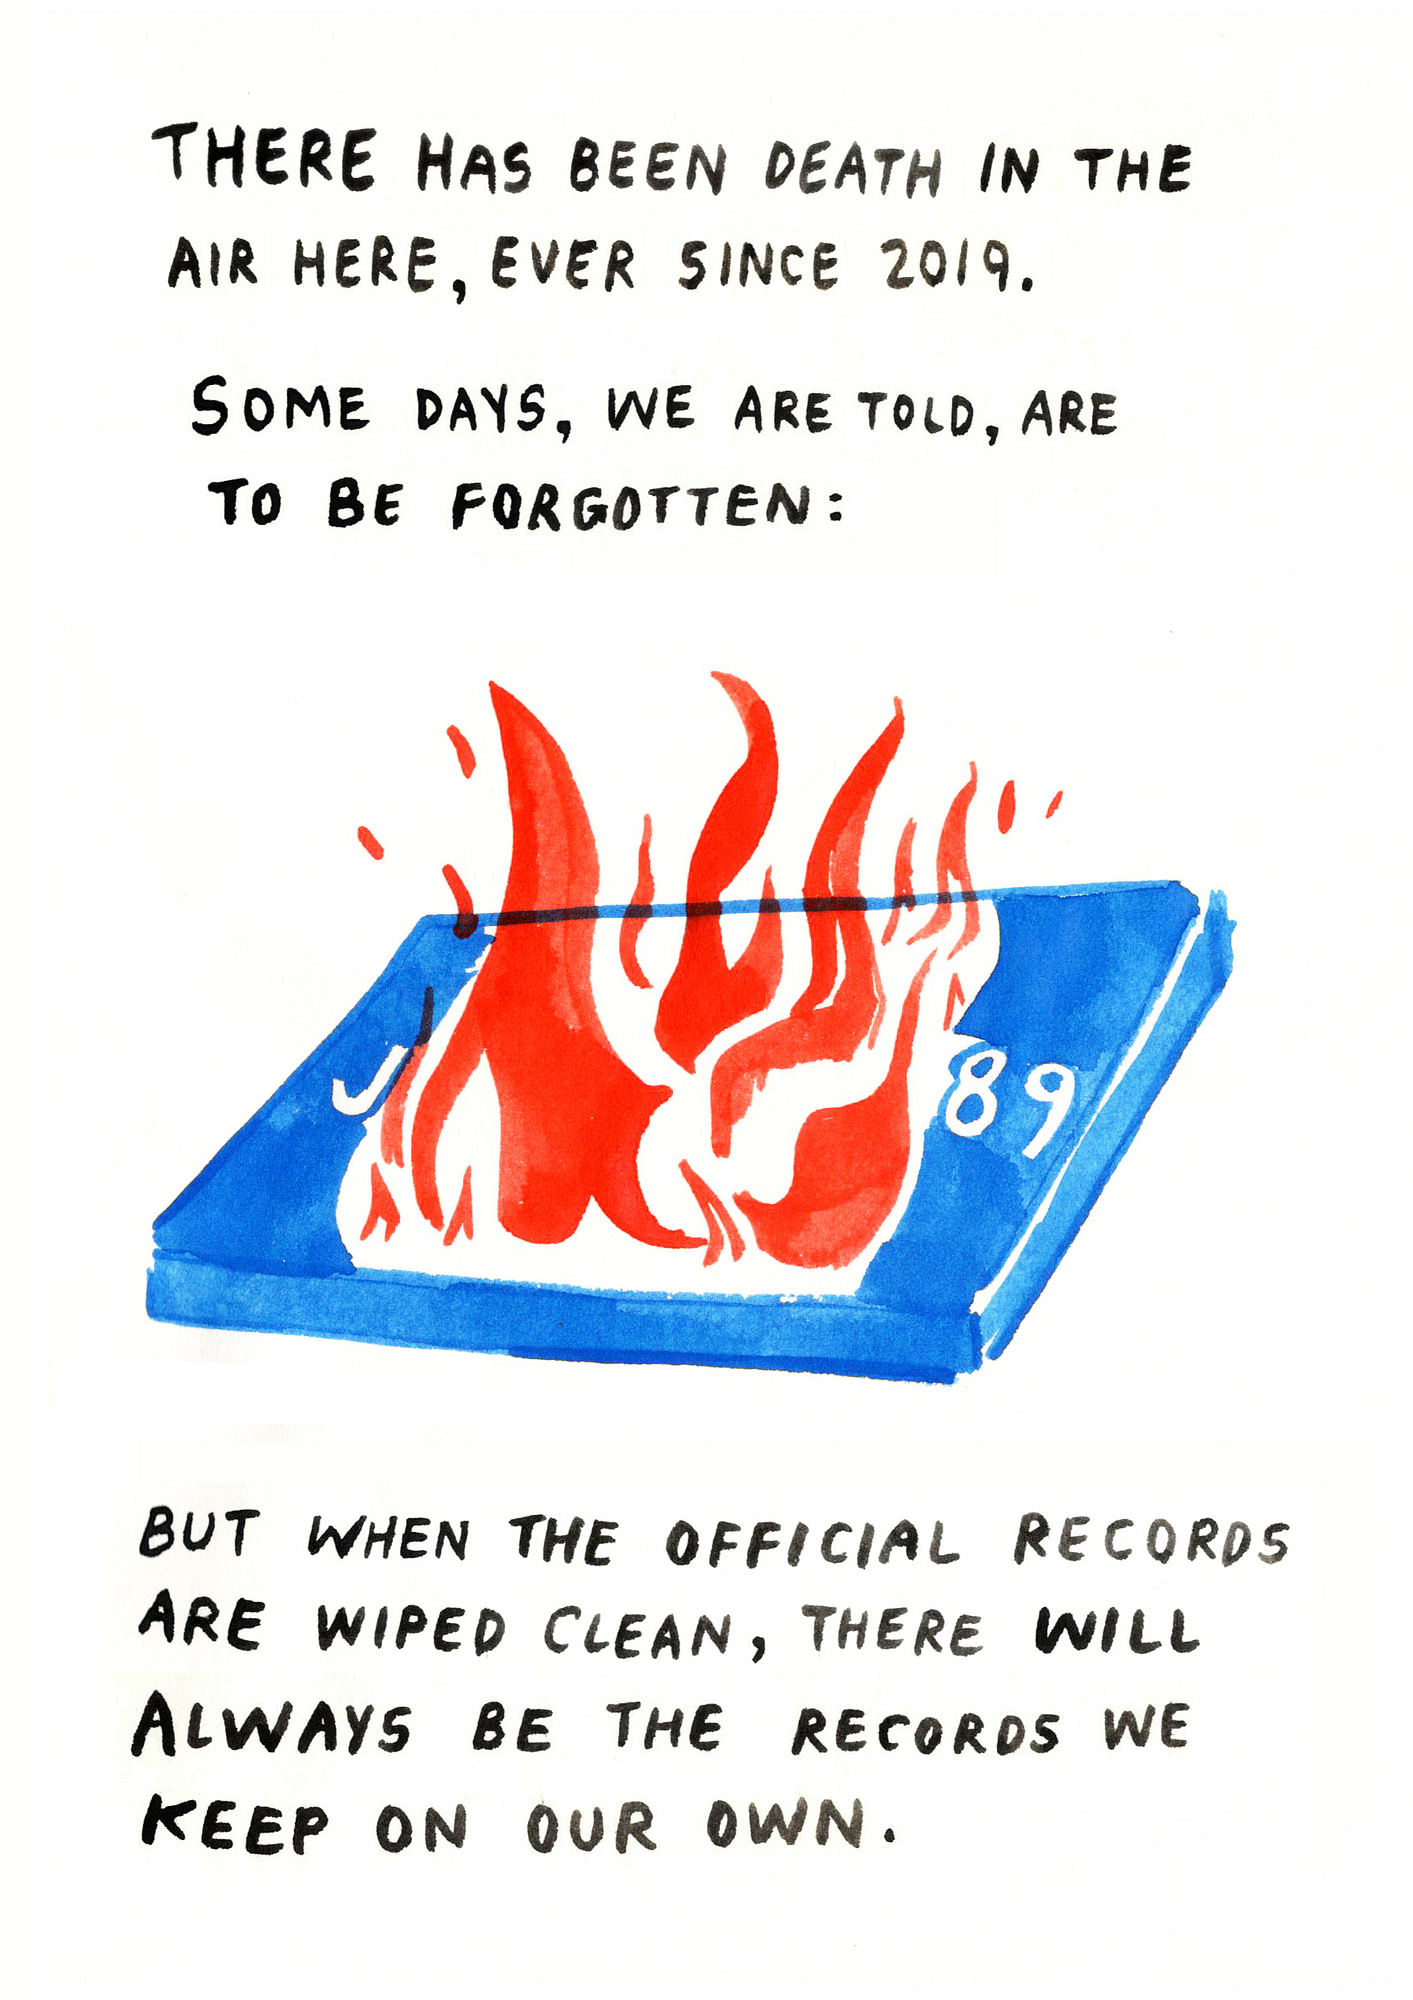 The text begins: “There has been death in the air here, ever since 2019. Some days, we are told, are to be forgotten:” This is followed by an illustration of one of Kawara’s date painting set on fire. The red flames contrast vividly with the blue canvas. The text continues: “But when the official records are wiped clean, there will always be the records we keep on our own.” 